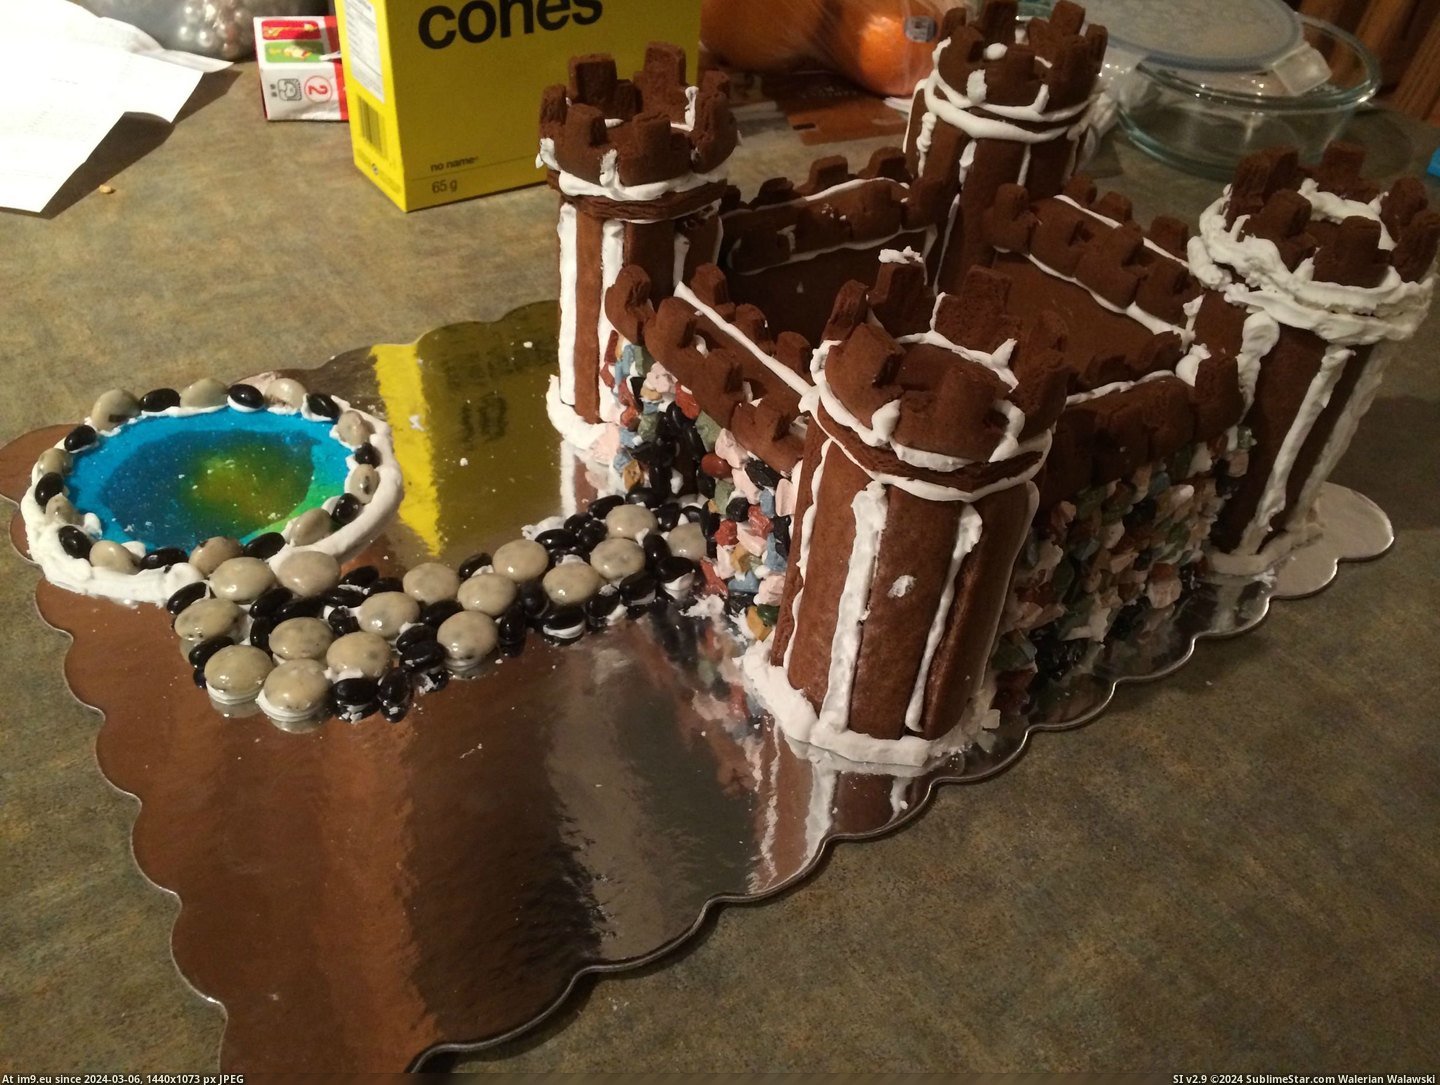 #Husband #Get #Our #Divorced #Collaborated #Project #Gingerbread #Success [Pics] My husband and I collaborated on our first gingerbread project and didn't get divorced...success! 12 Pic. (Bild von album My r/PICS favs))